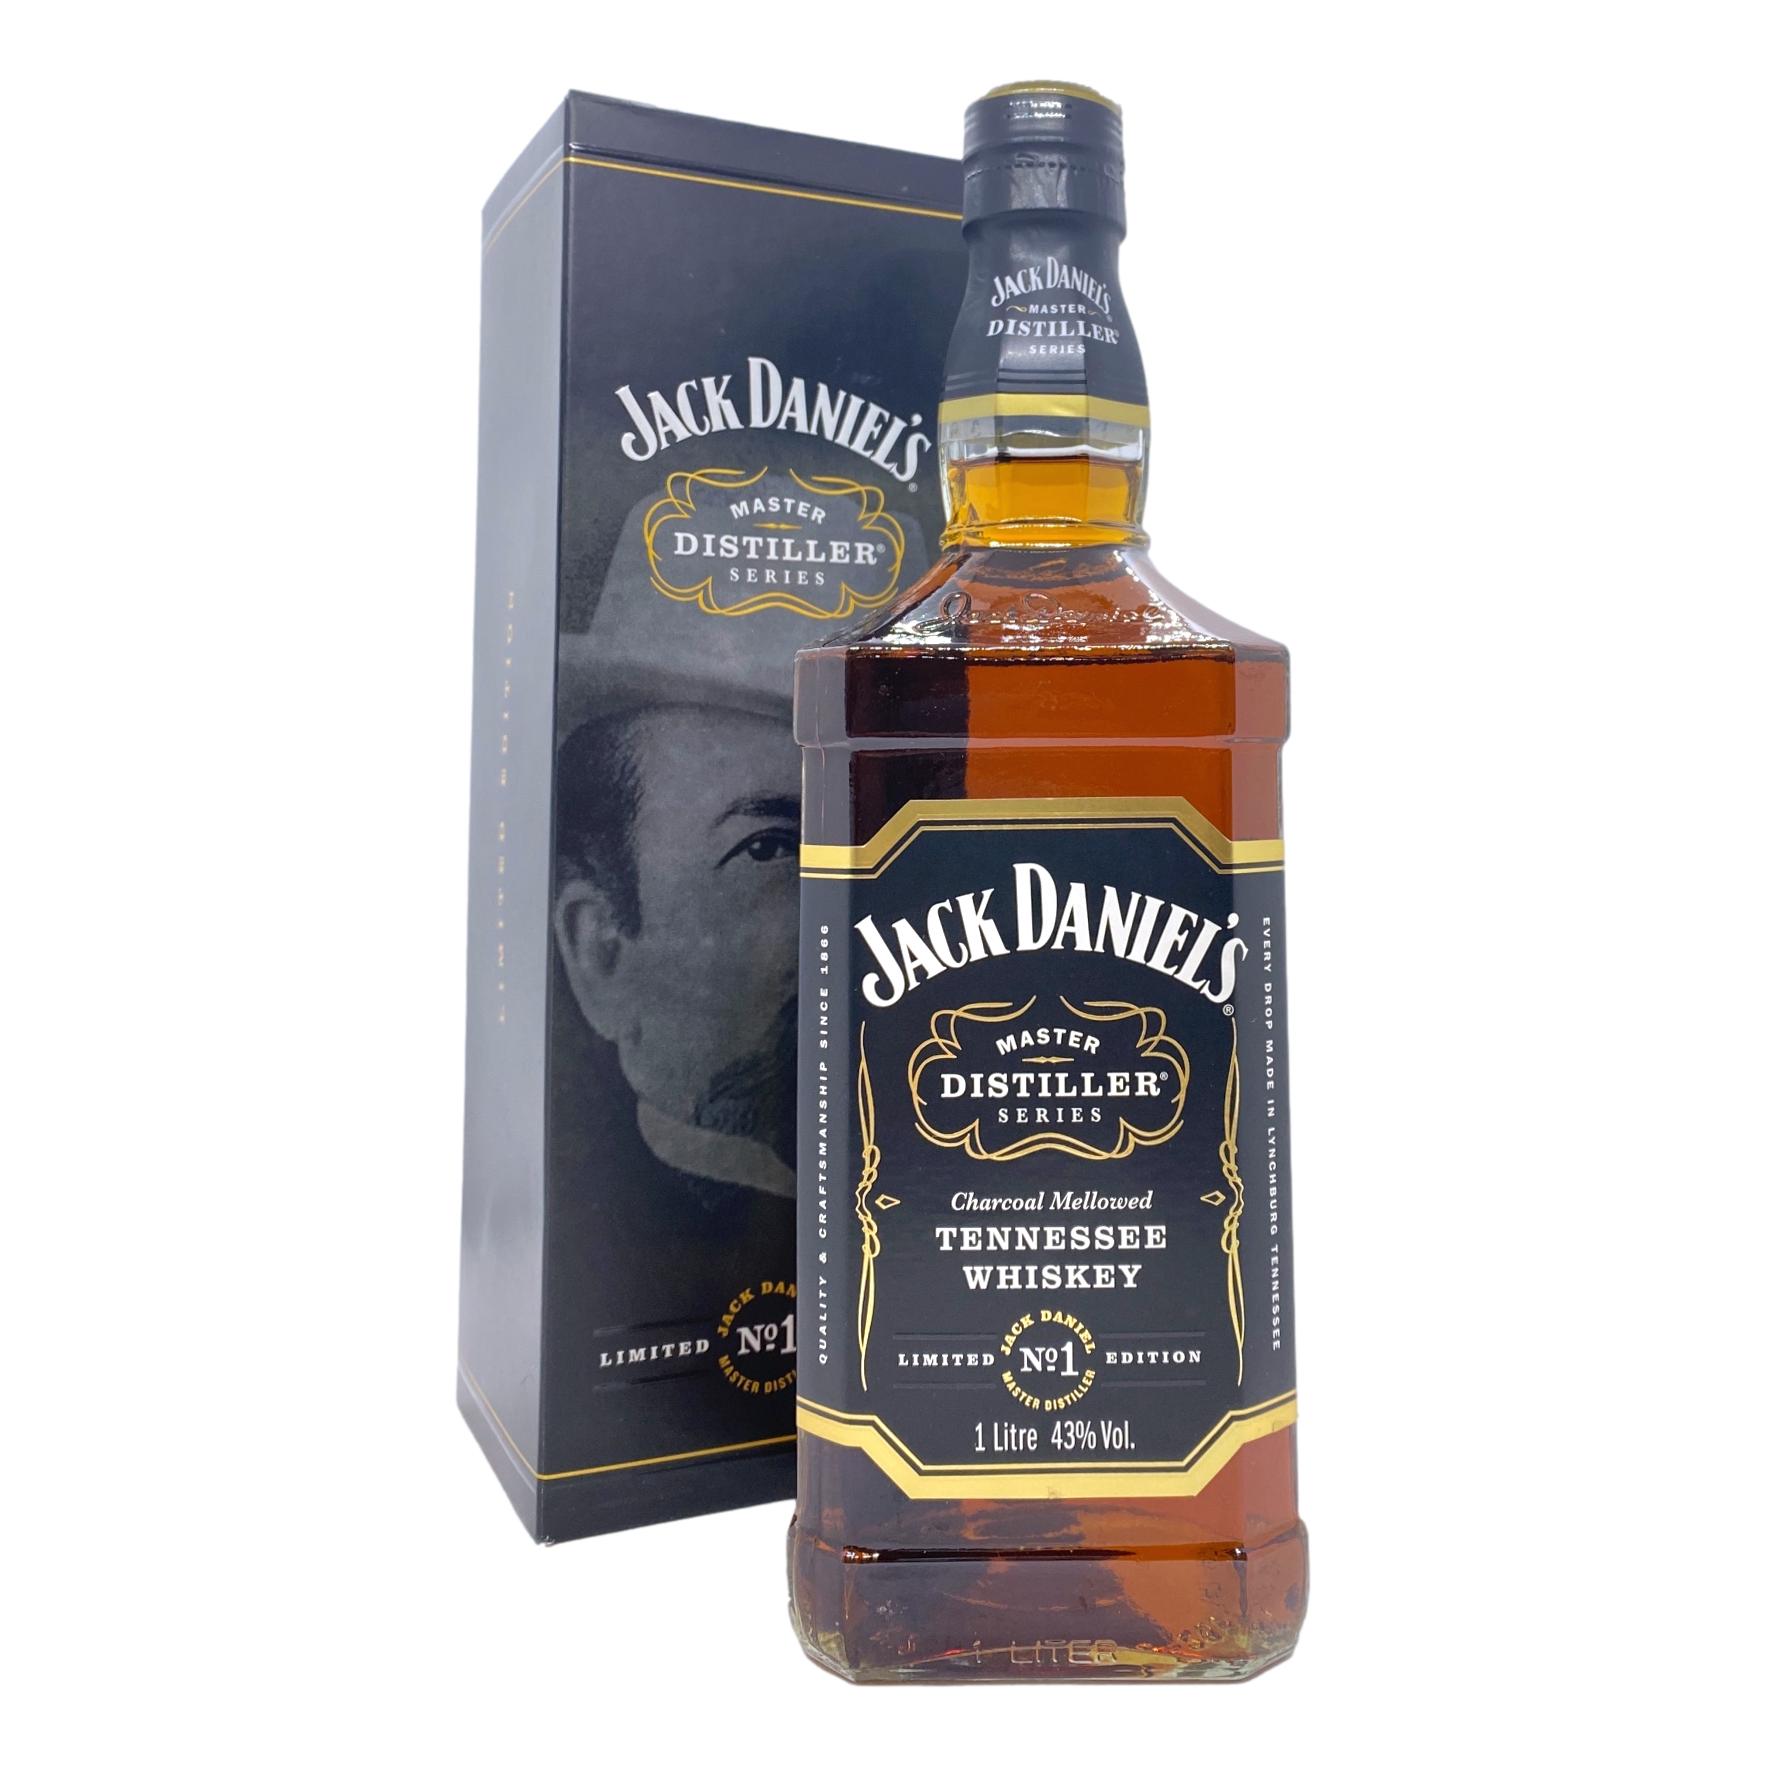 2021 Jack Daniel's 10 Year Old Tennessee Whiskey 750ml